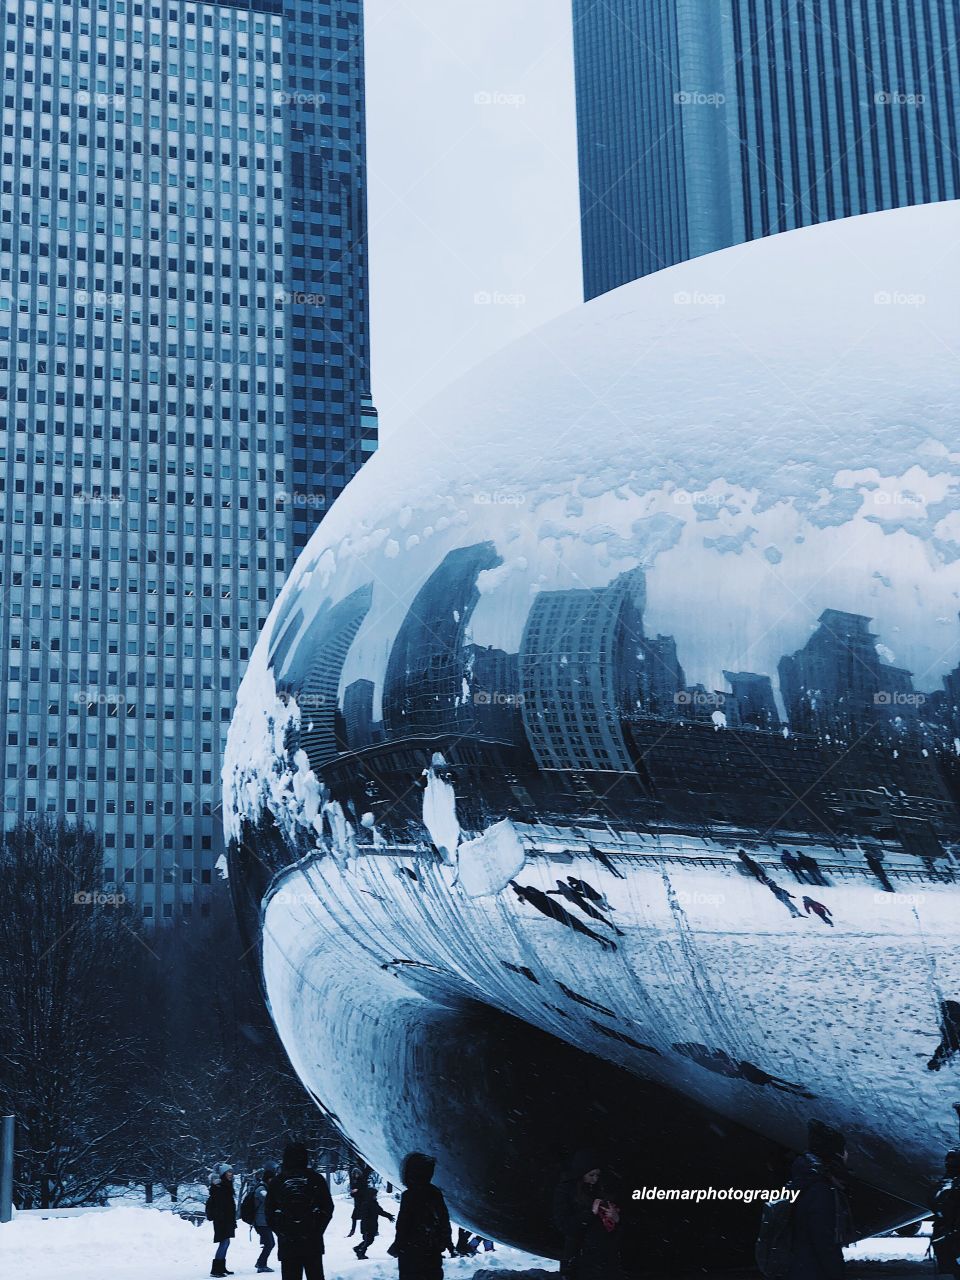 The bean. In the beautiful winter snow, I’m from Houston and been into photography for awhile, but I have always had a strong admiration for the cold and snow, and I’ve always tried to match the aesthetic of snow with my photos. Enjoy. 